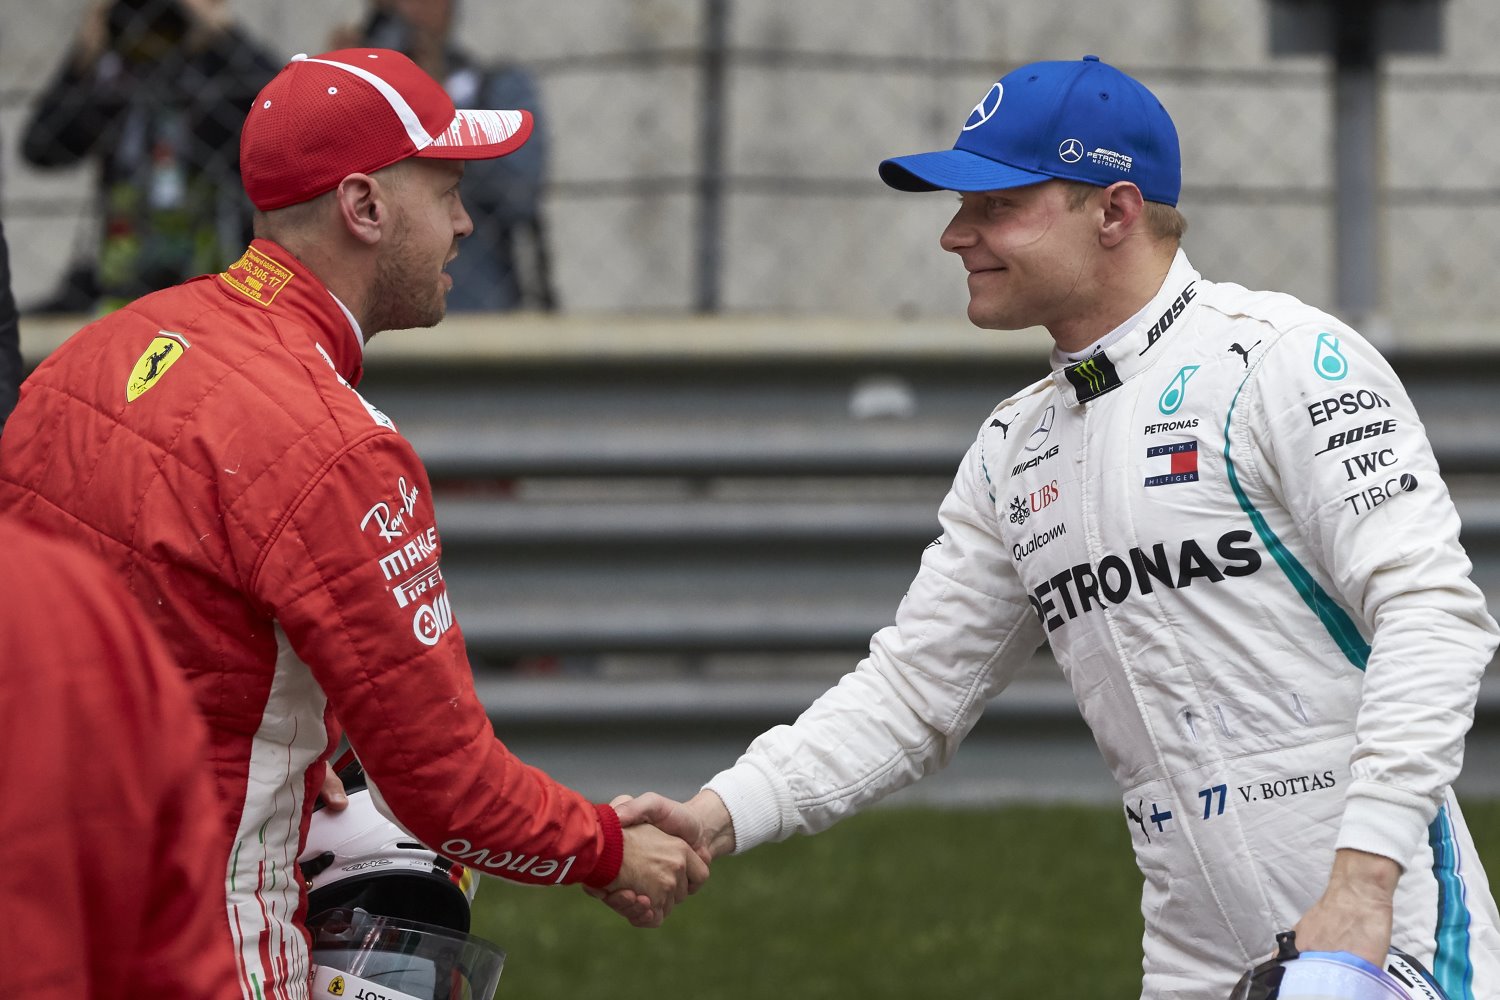 Vettel and Bottas agree they were screwed by the FIA in China